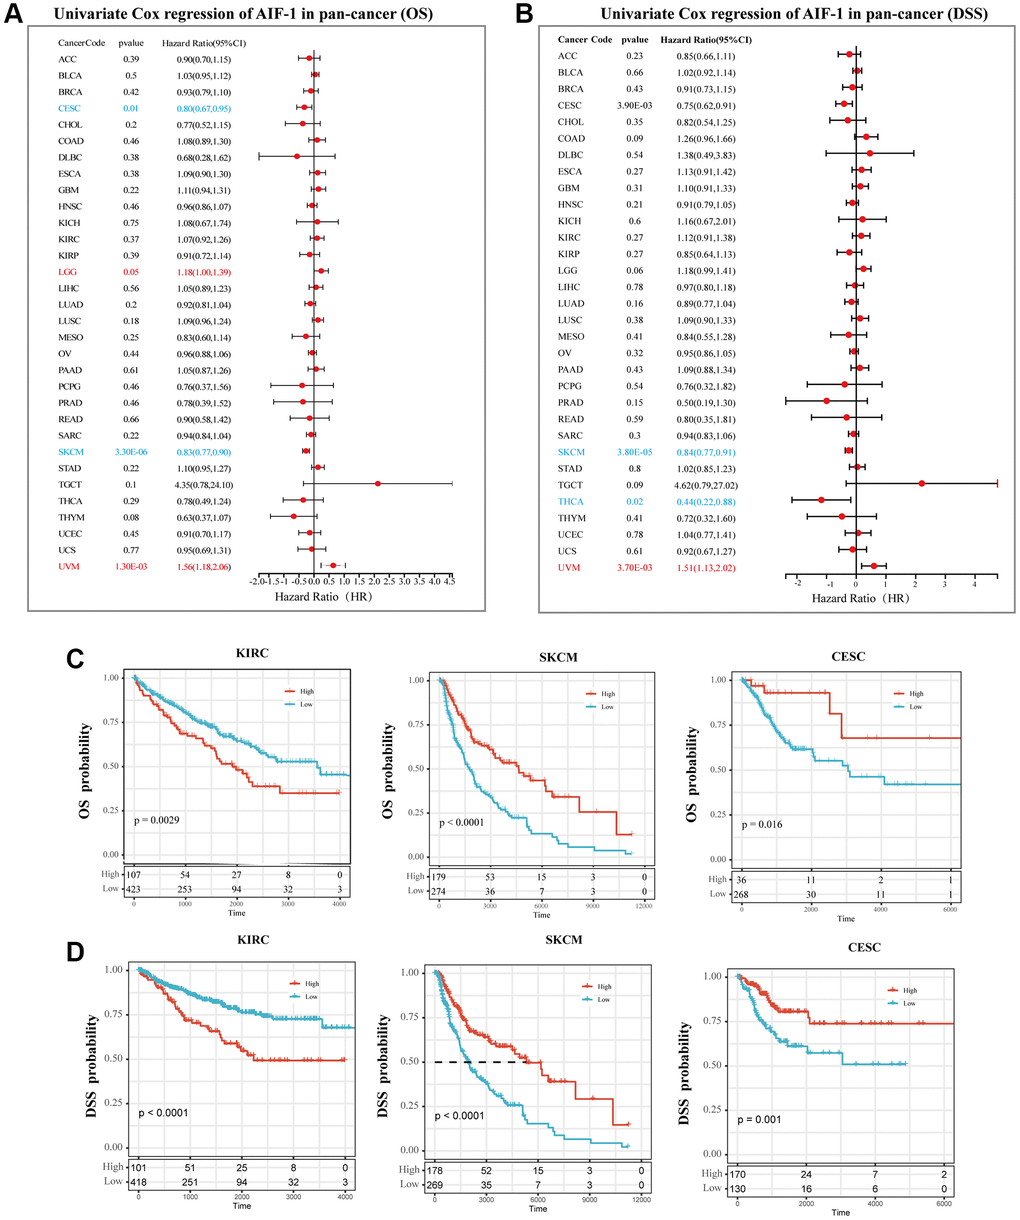 Prognostic analysis of AIF-1 in pan-cancer. (A) The forest plot shows the association between AIF-1 expression and OS by the univariate Cox regression method. (B) The forest plot shows the association between AIF-1 expression and cancer DSS by the univariate Cox regression method. (C) Kaplan-Meier OS curves of AIF-1 in CESC, KIRC, and SKCM. (D) Kaplan-Meier DSS curves of AIF-1 in CESC, KIRC, and SKCM.